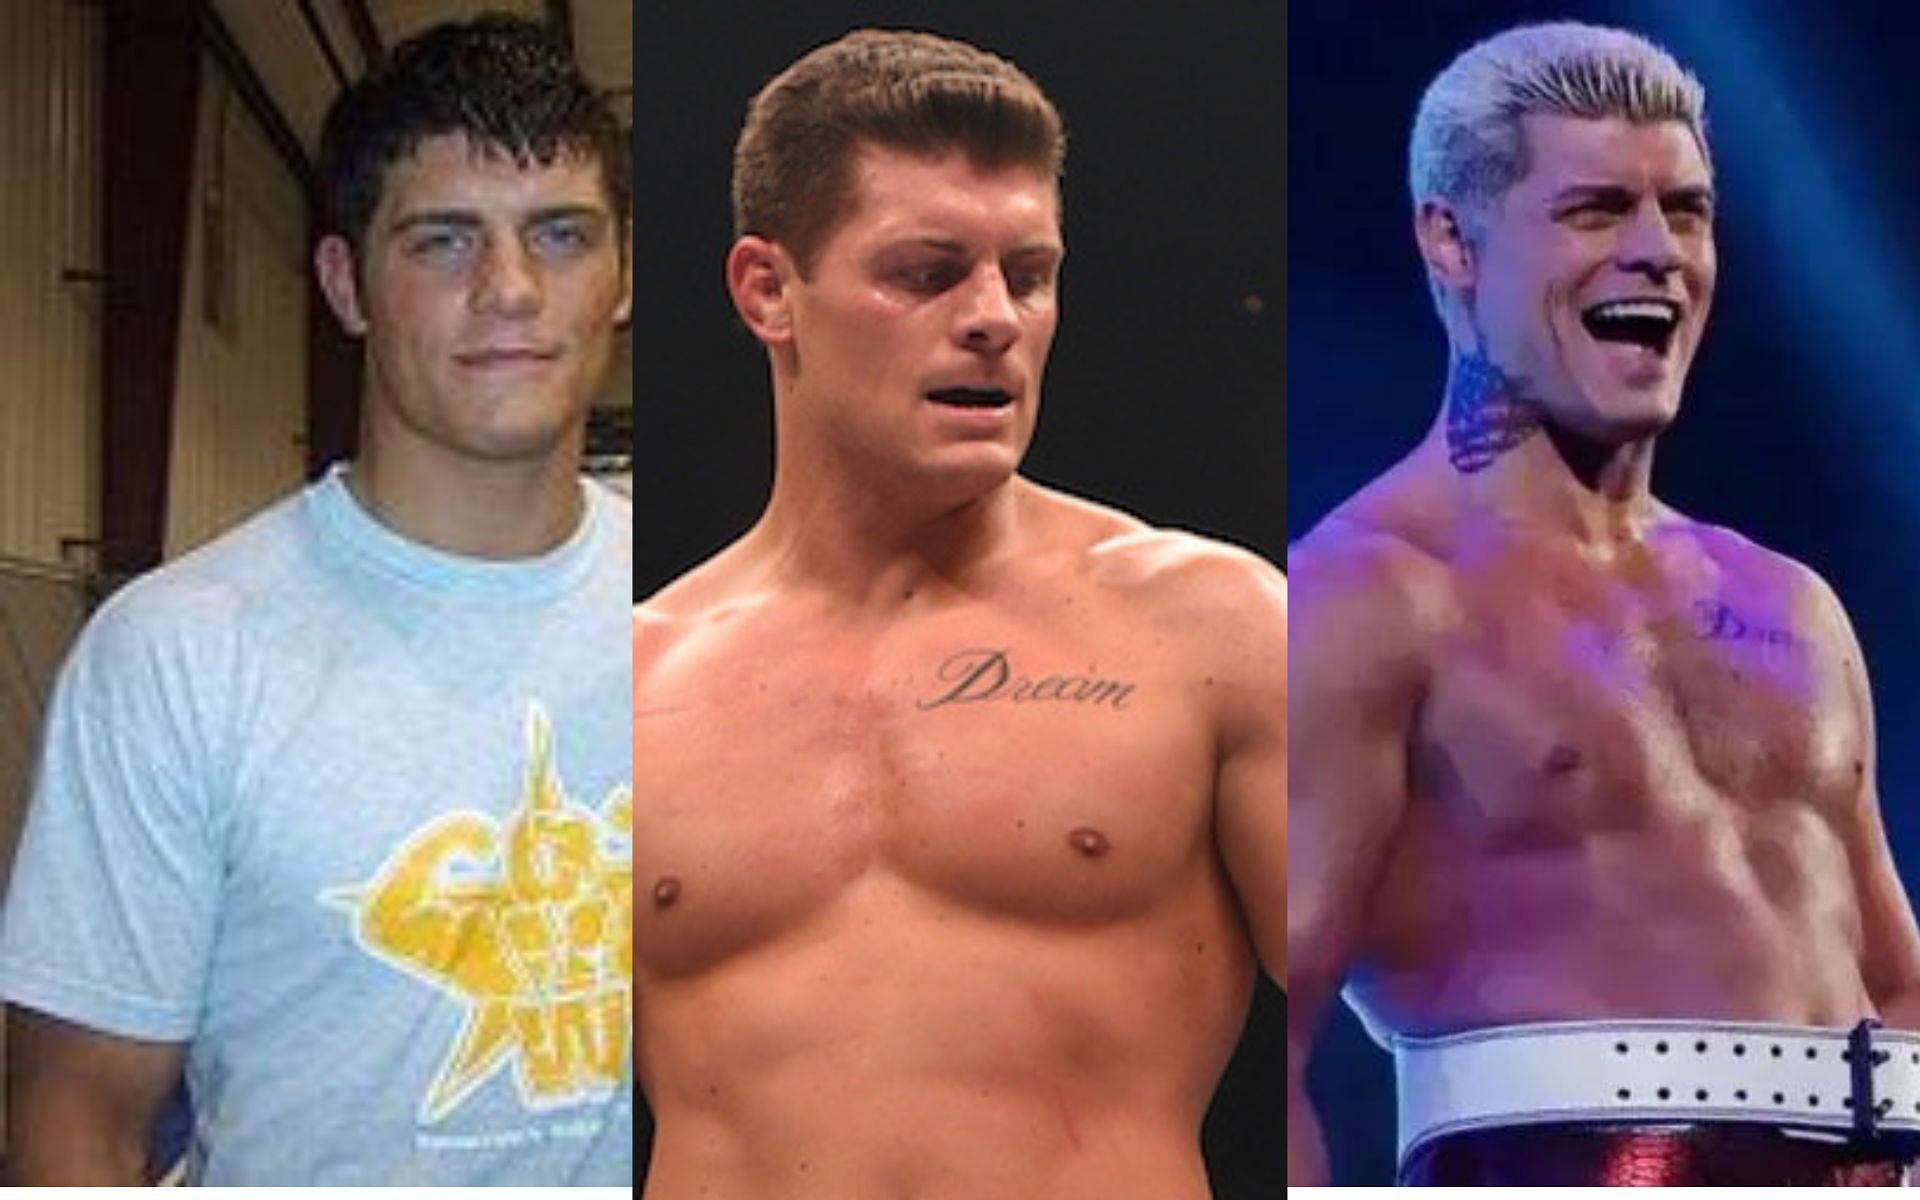 Cody Rhodes had a nearly ten year stint with WWE early on his career